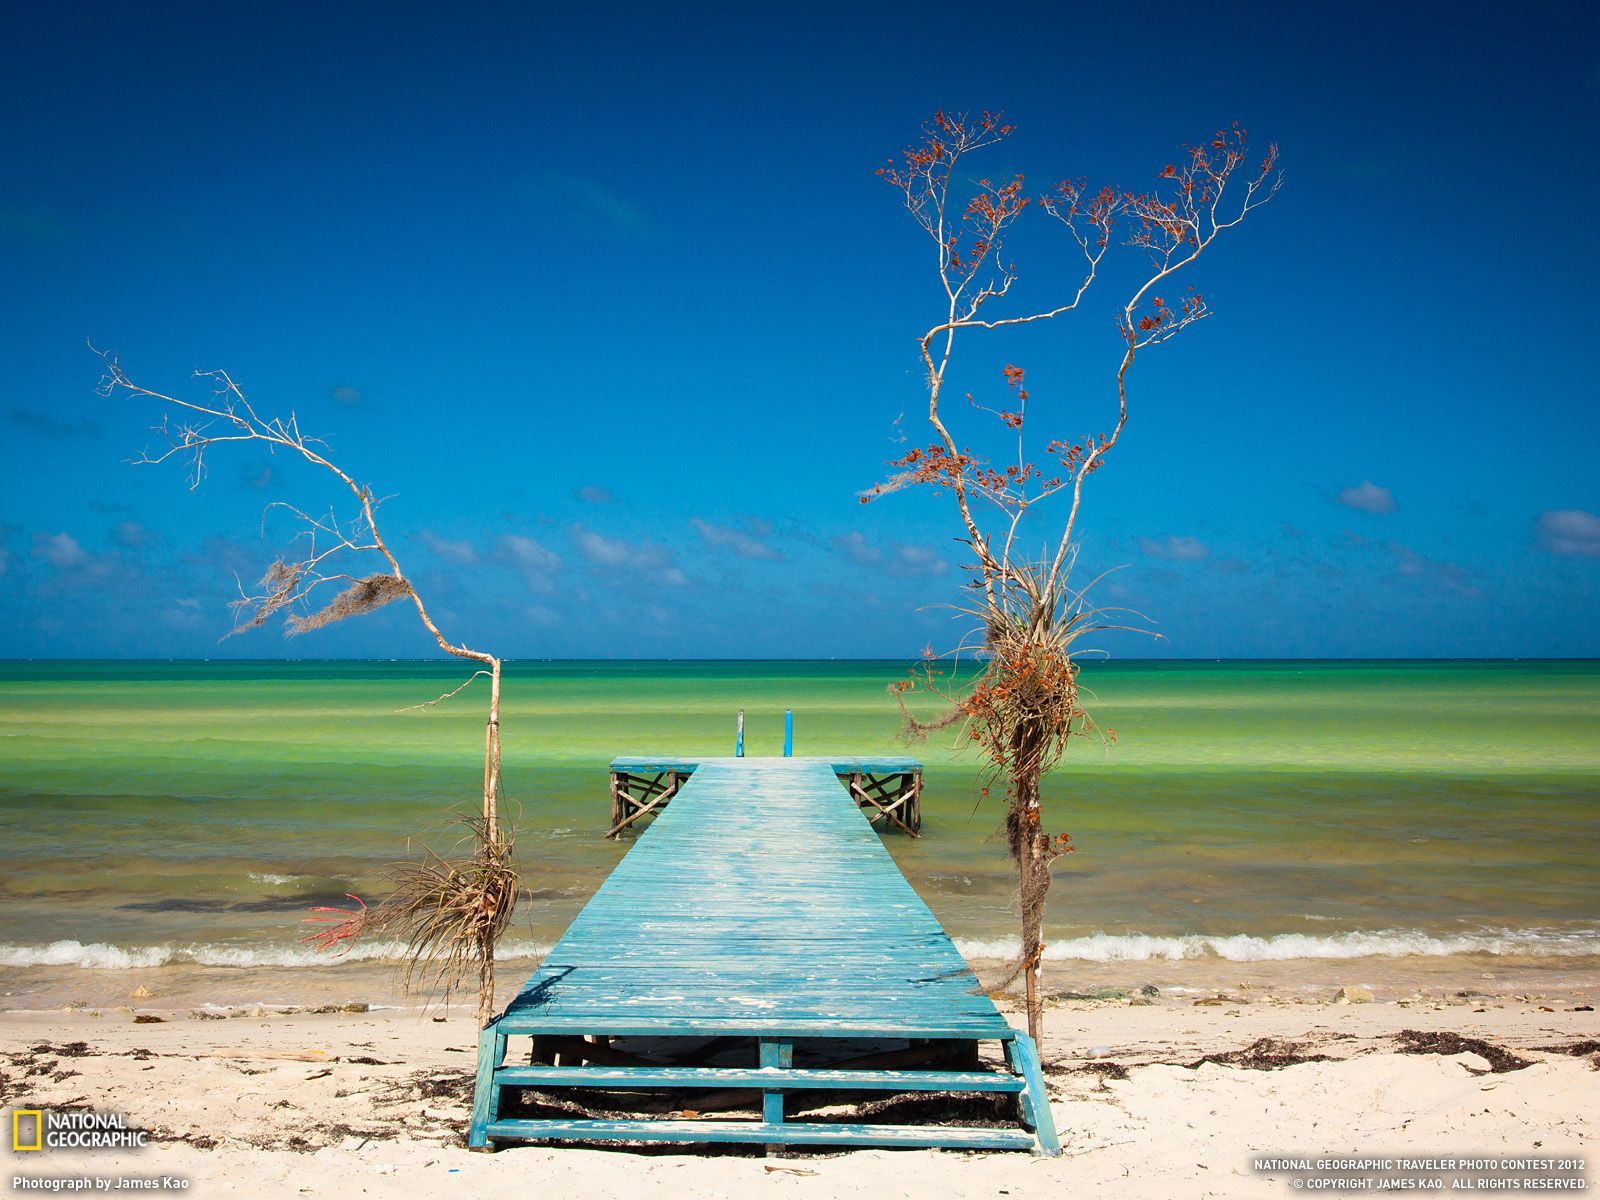 Cuba Picture – Beach Wallpaper - National Geographic Photo of the Day